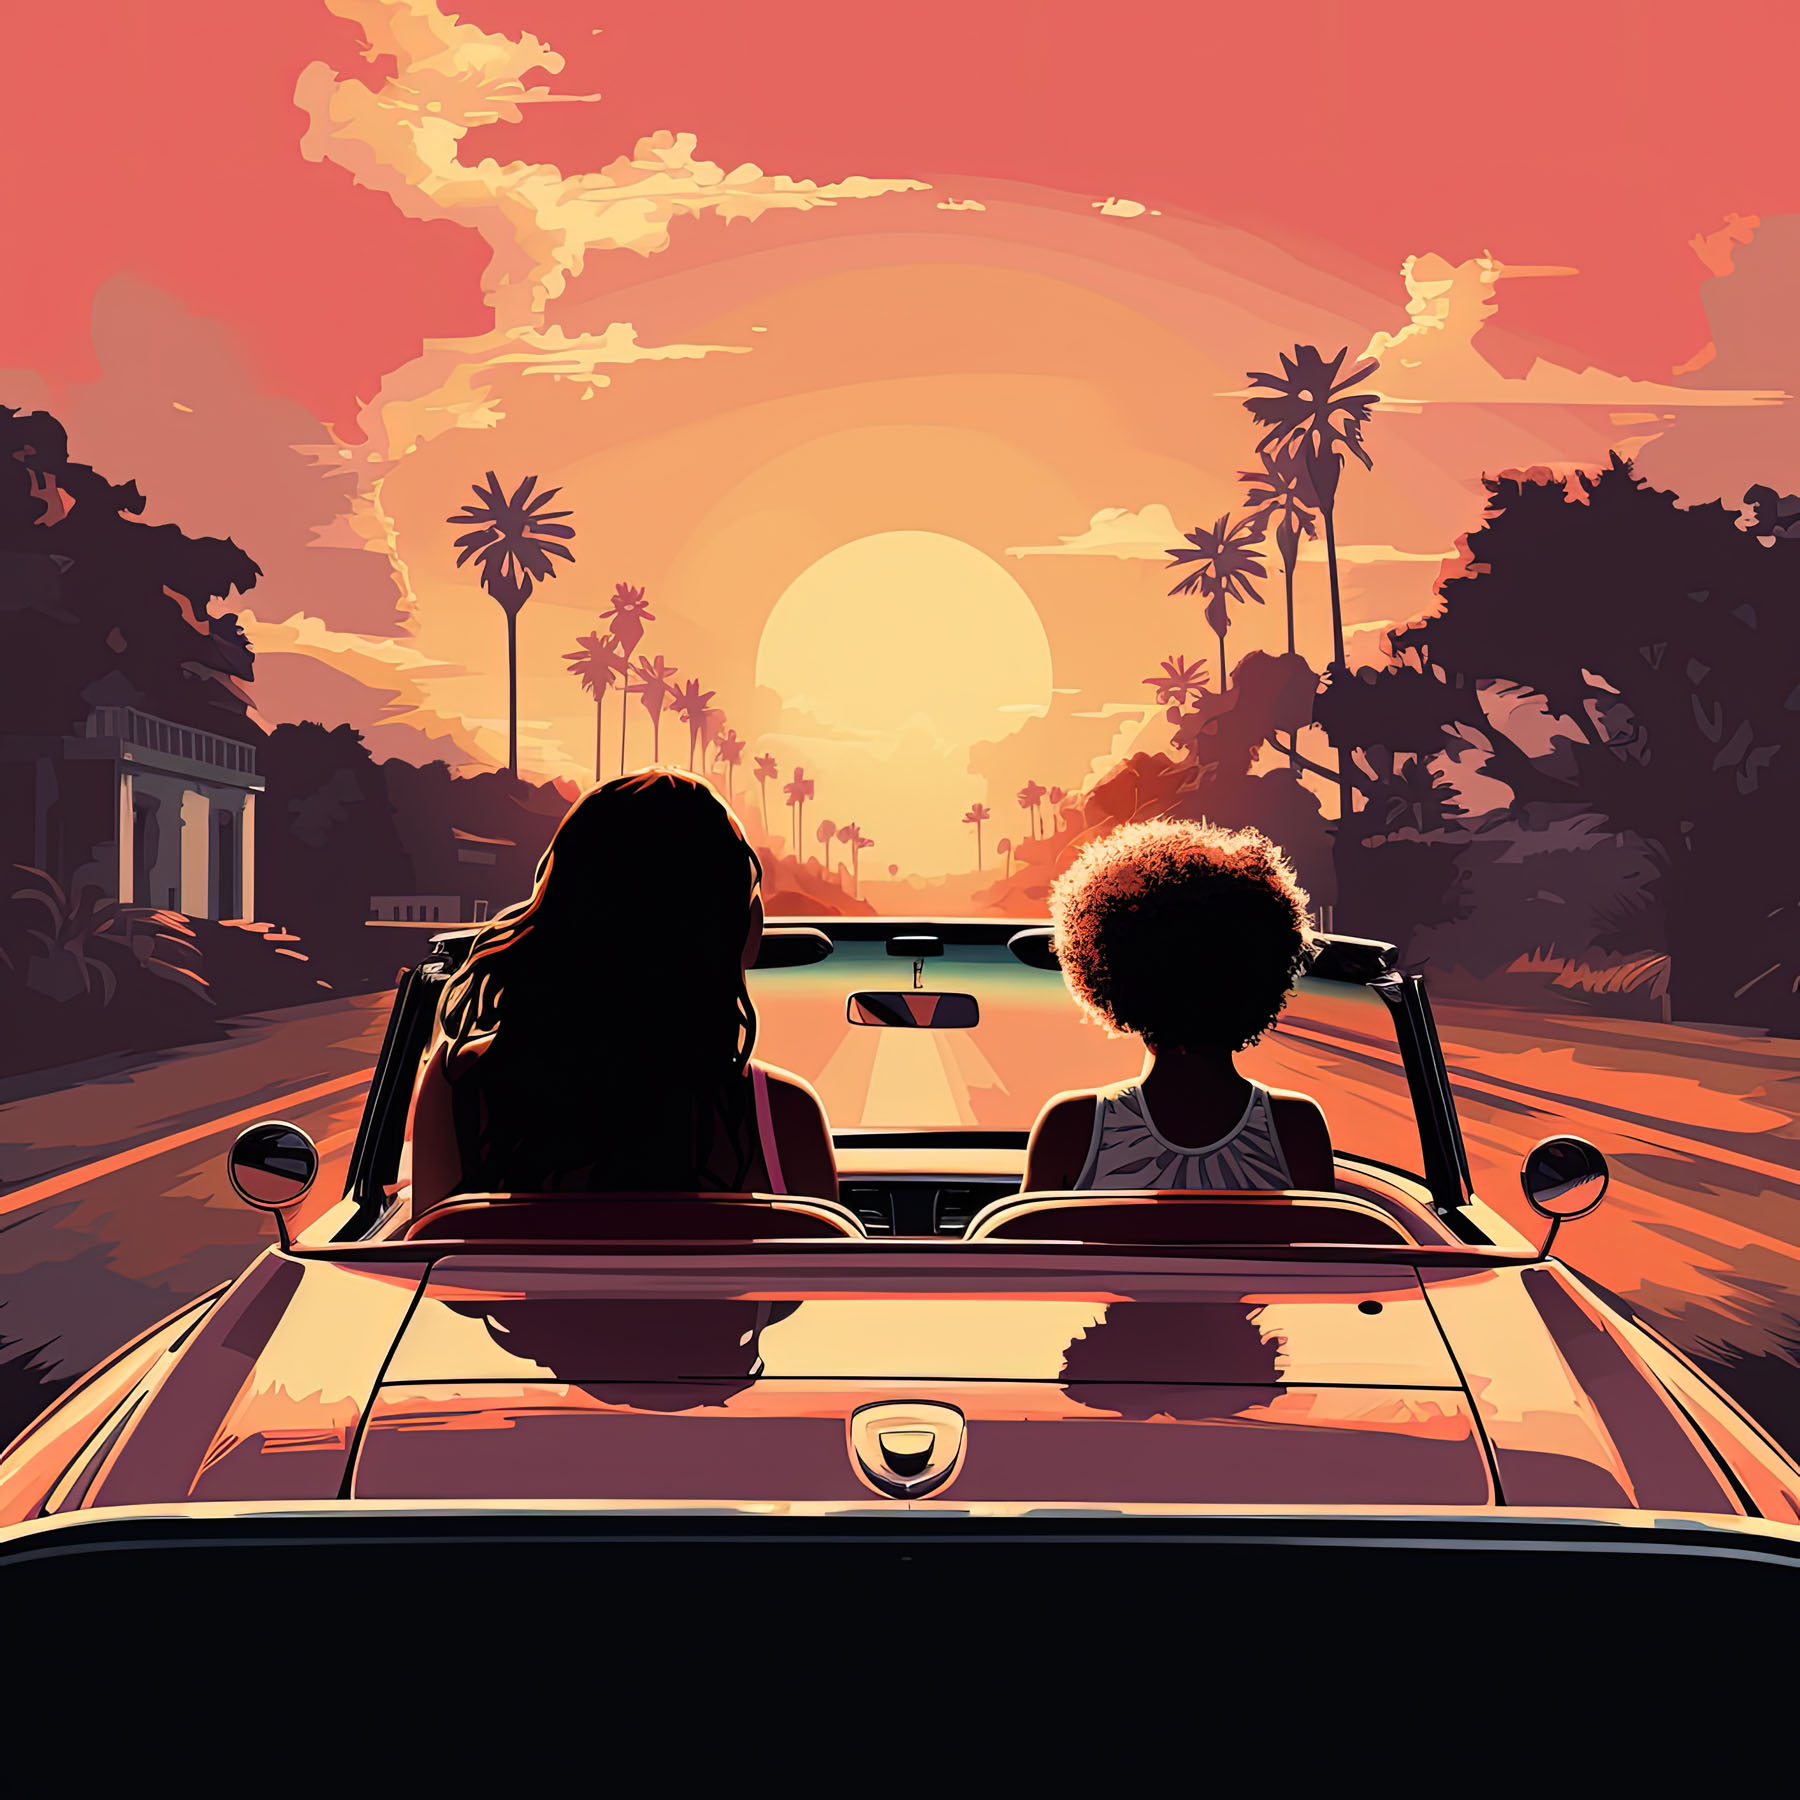 A mother and daughter drive in a car with the top down on a palm tree lined street towards a bright sunset.